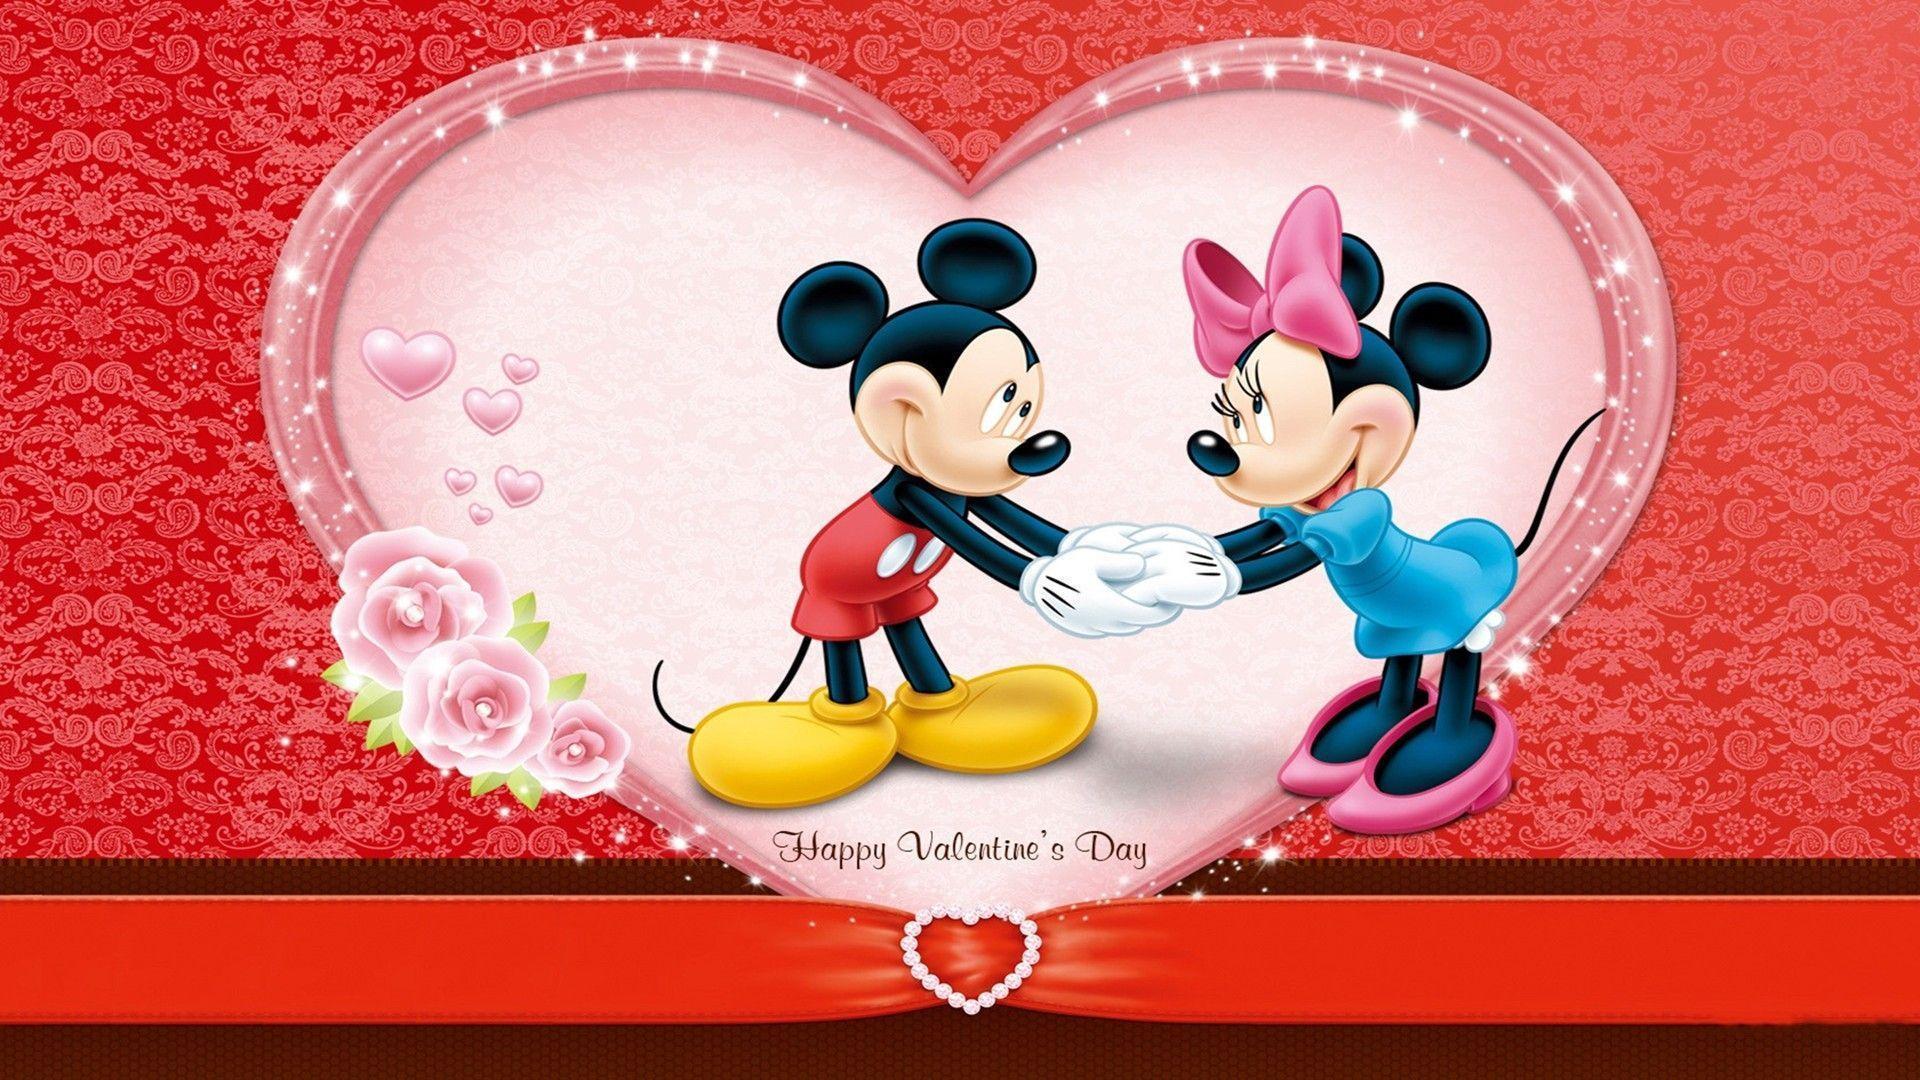 Cute Mickey Wishes Happy Valentines Day 2014 HD Wallpaper. HD